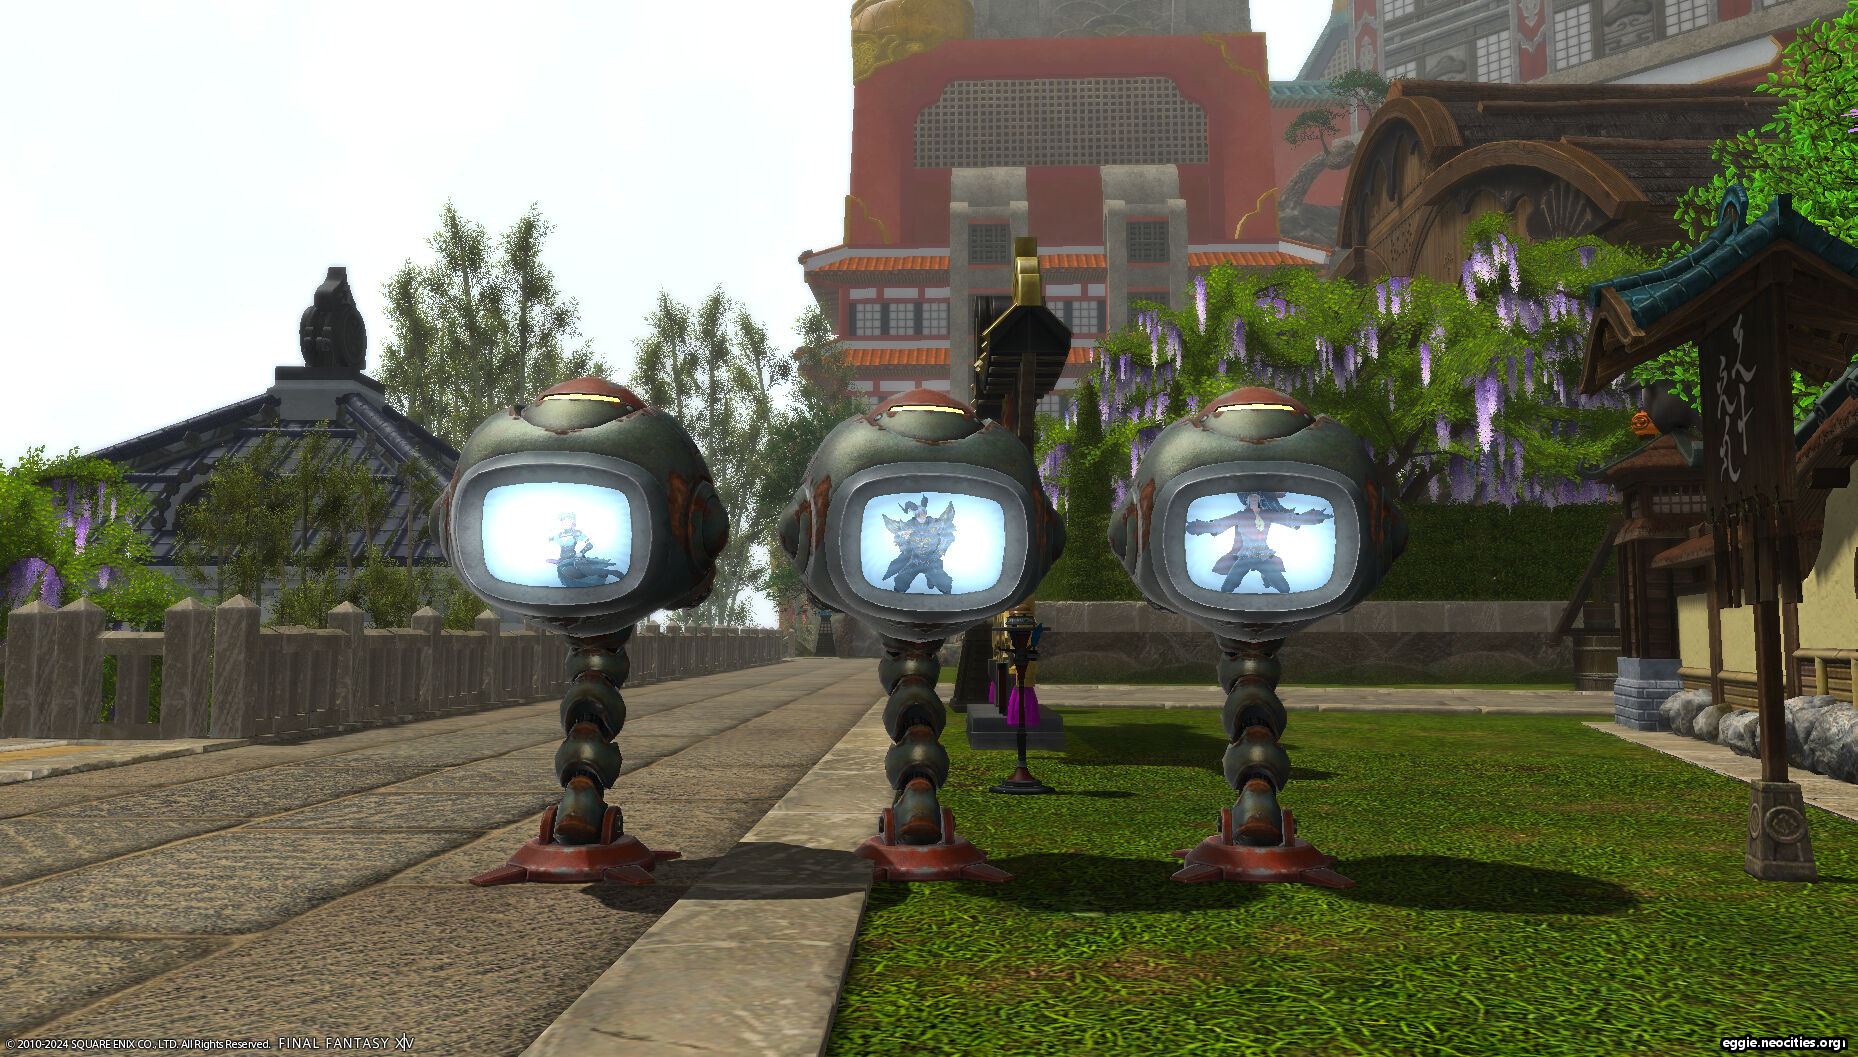 Zel, Mag, and Amon posing inside their level checker mounts